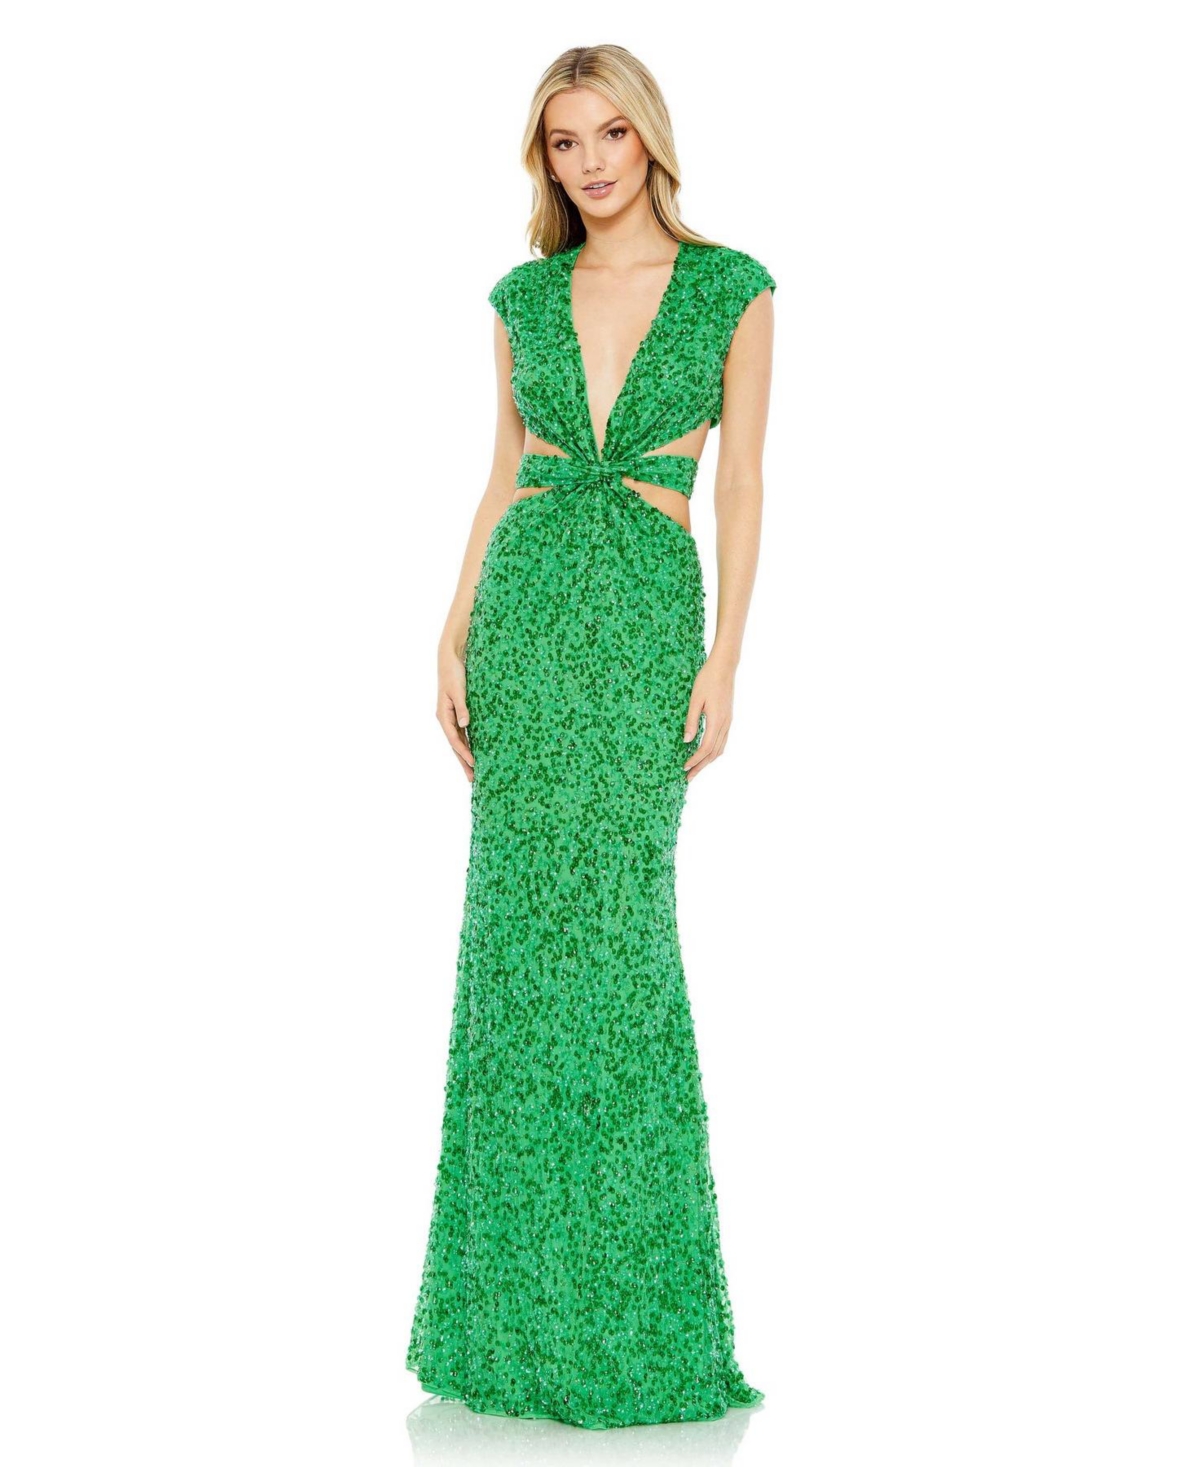 Women's Sequined Cap Sleeveless Plunge Neck Cut Out Gown - Spring green